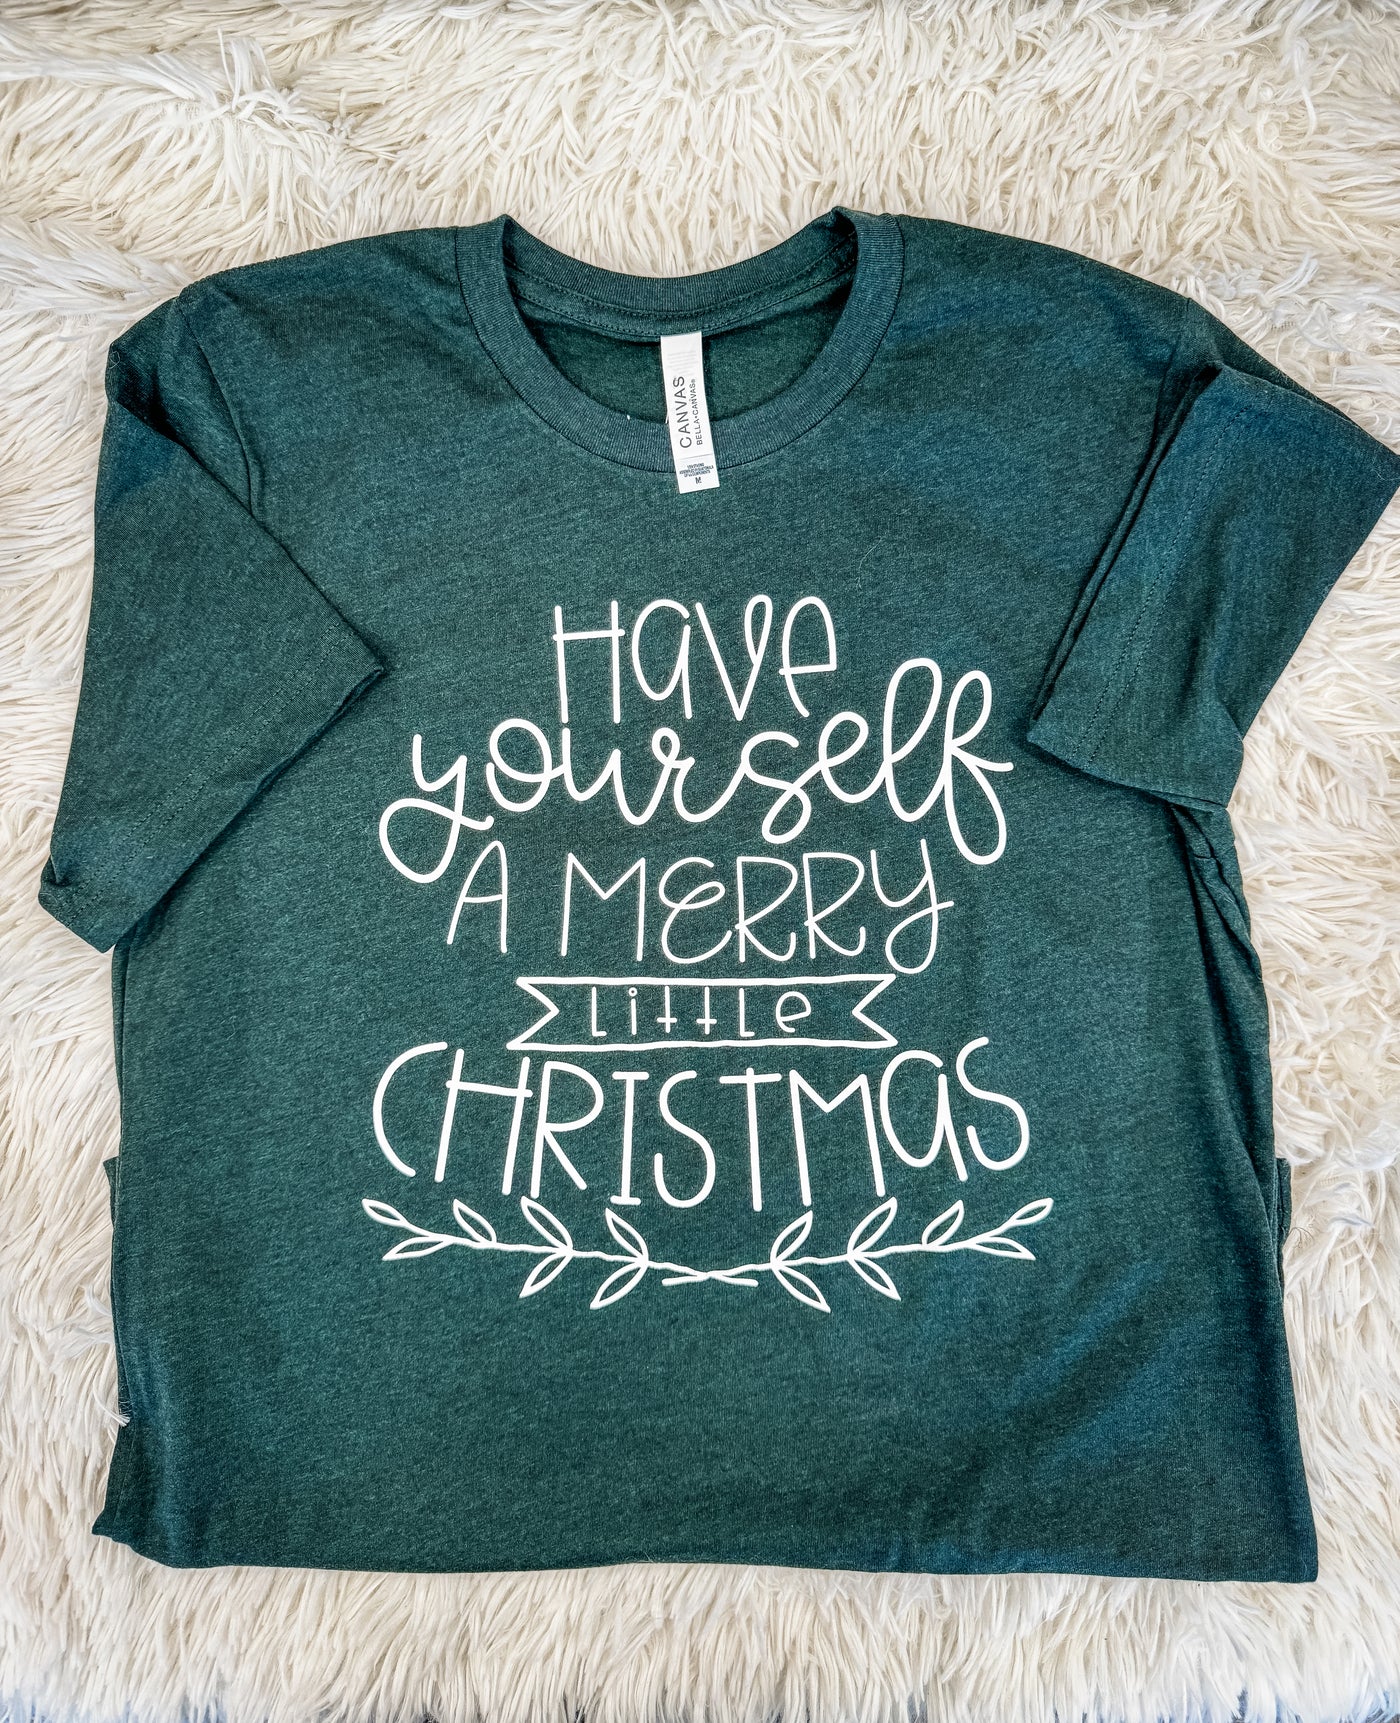 Merry Little Christmas Graphic T-shirt